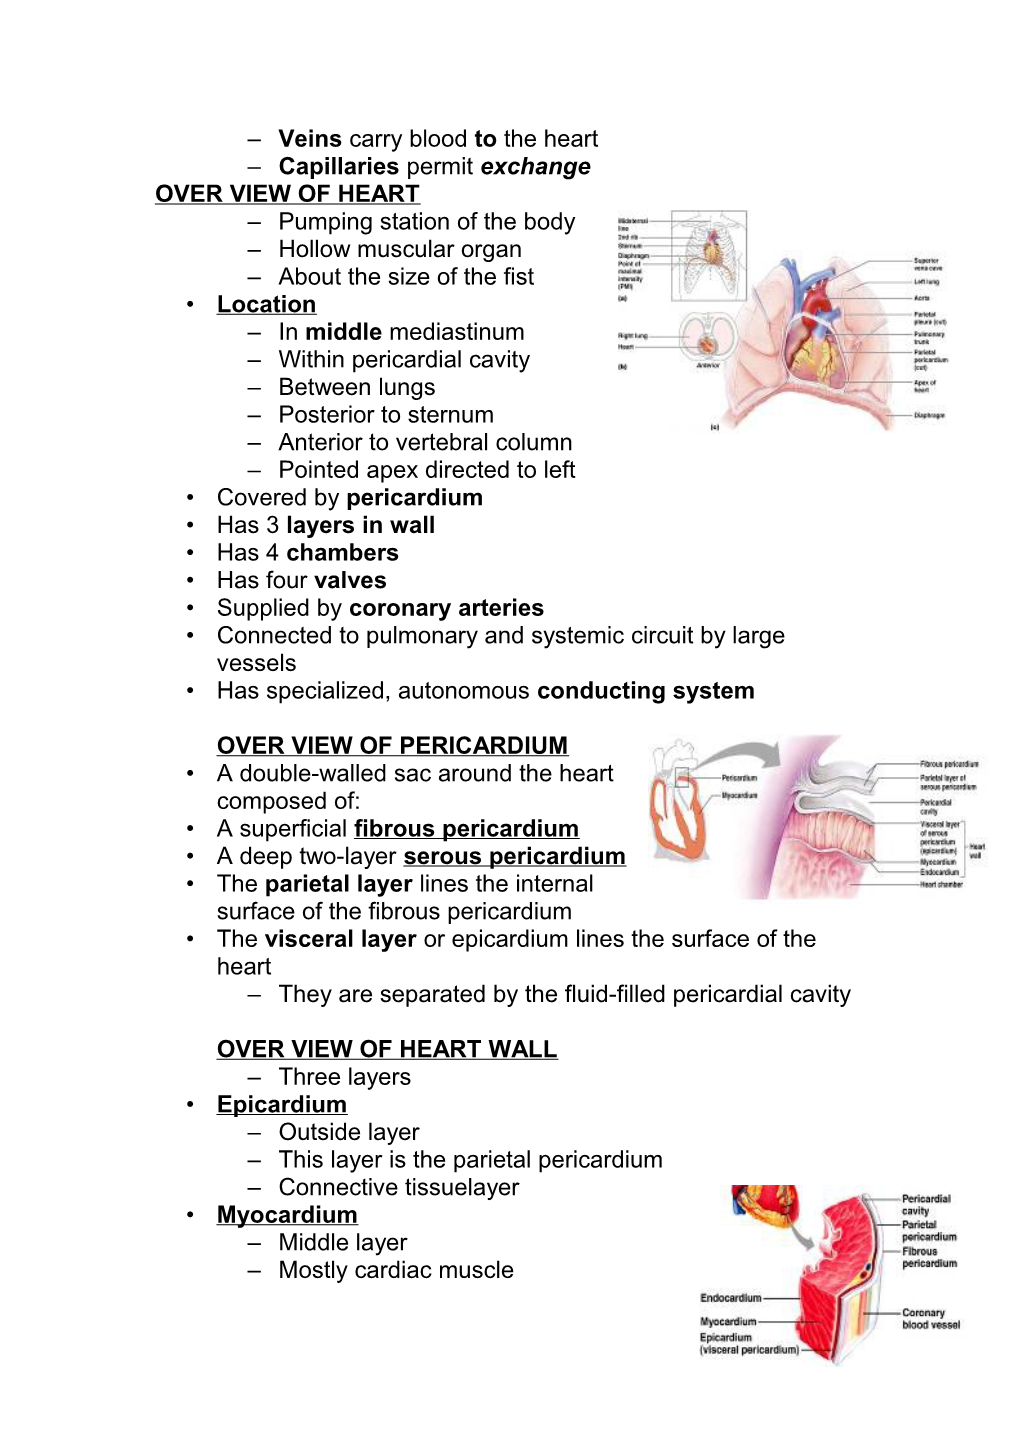 Over View of Circulatory System